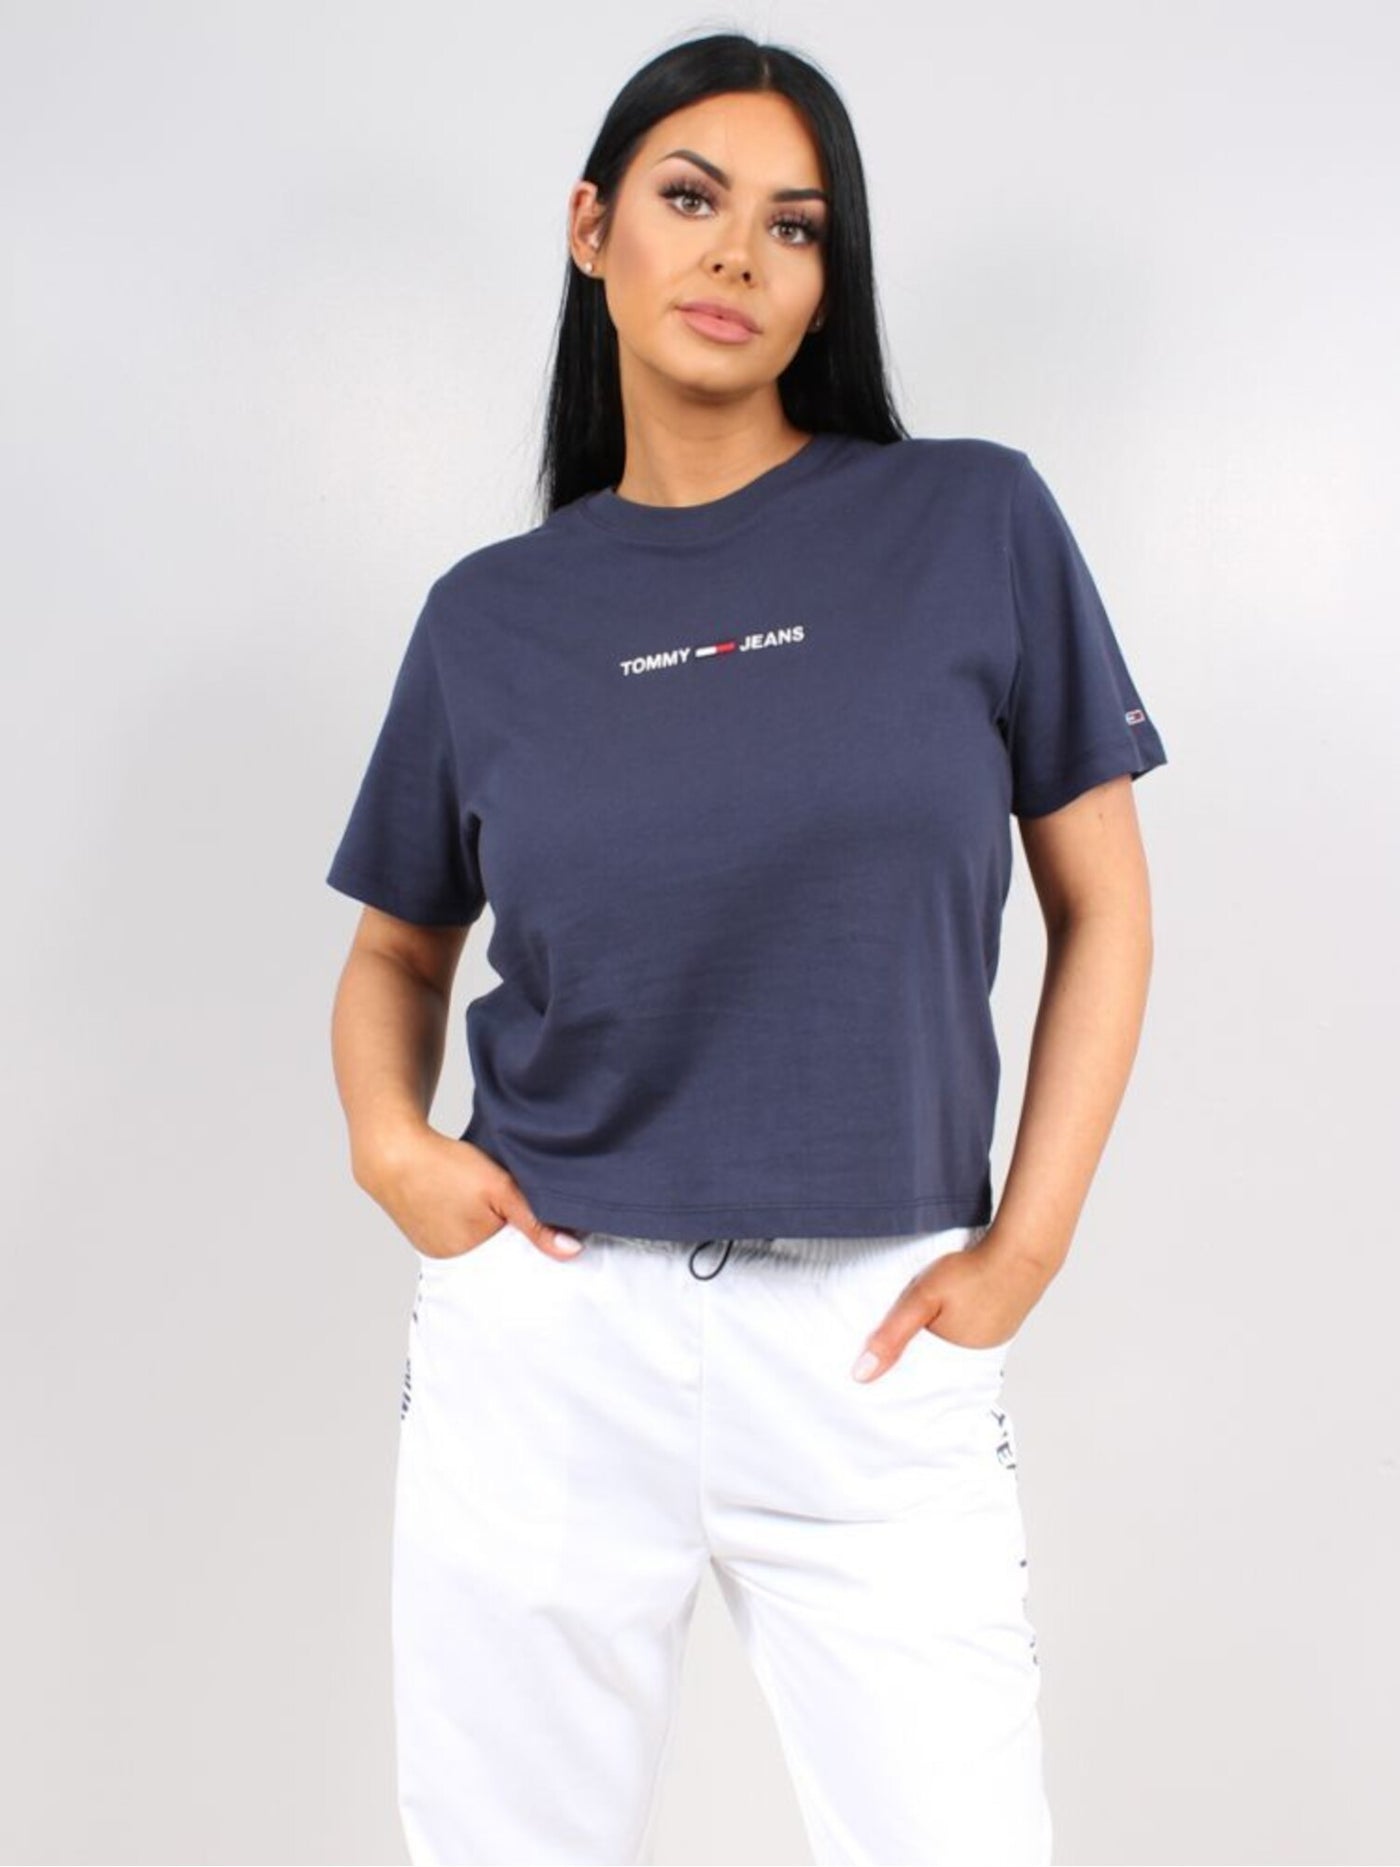 TOMMY HILFIGER SPORT Womens Cotton Blend Ribbed Embroidered Short Sleeve Crew Neck T-Shirt